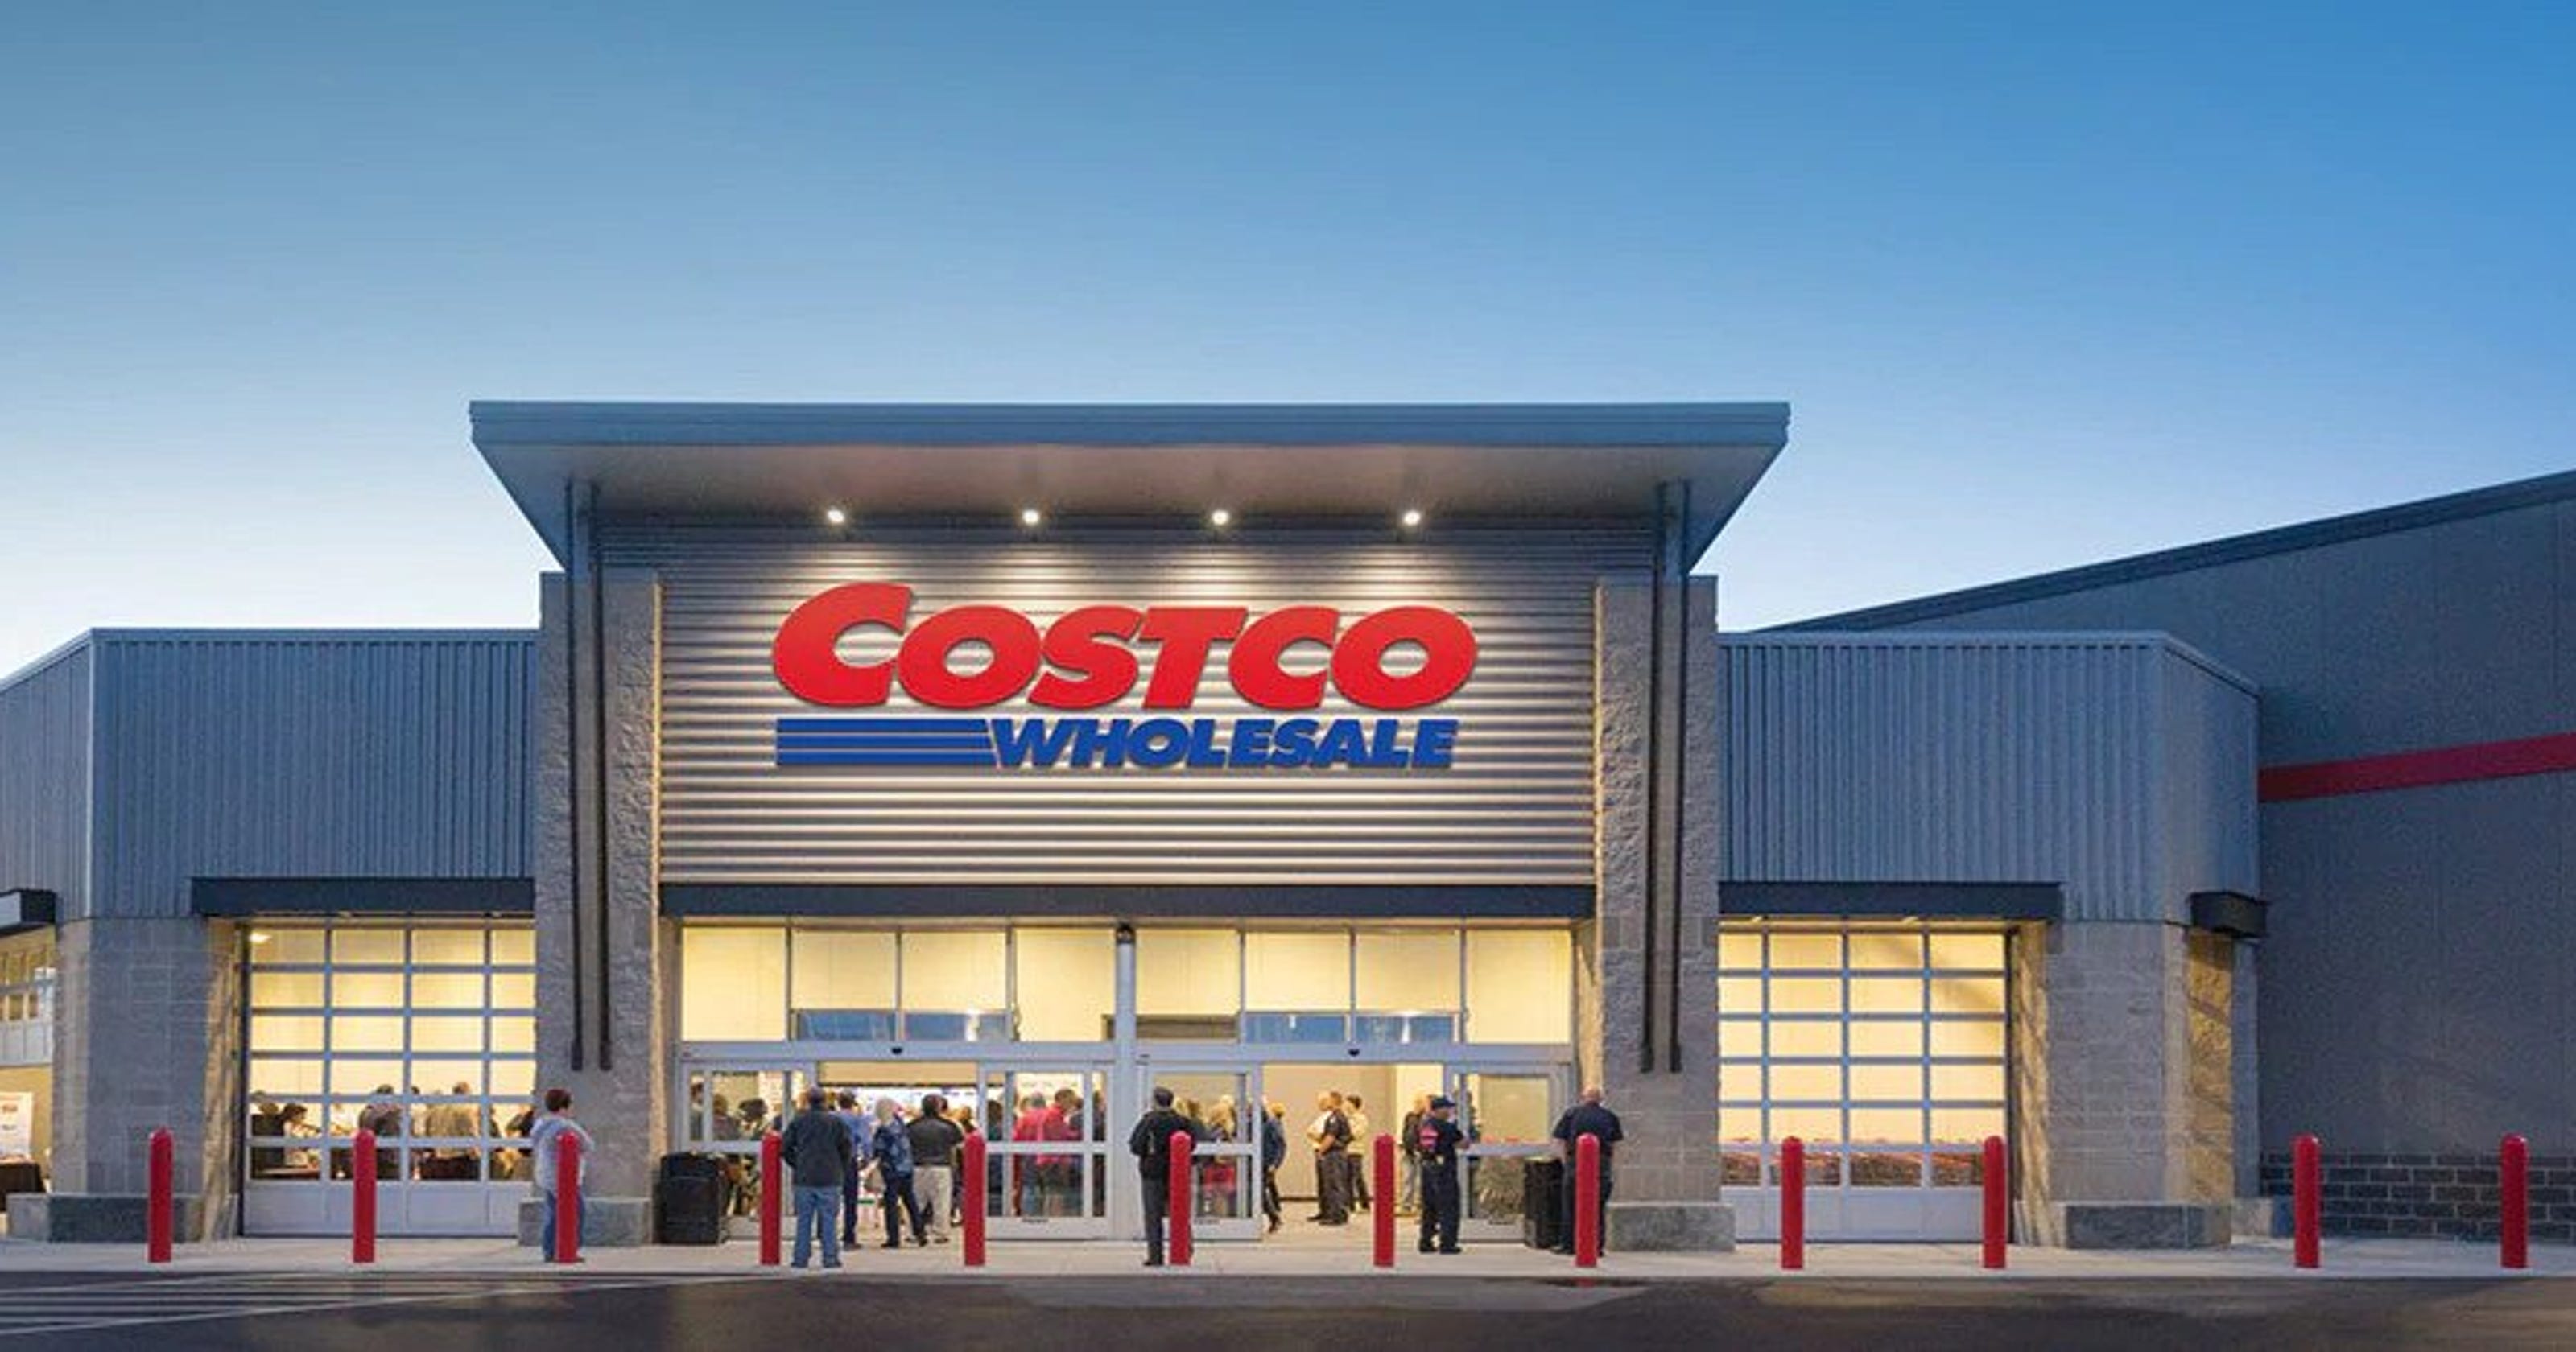 redding-costco-store-s-relocation-plan-on-hold-until-2020-here-s-why